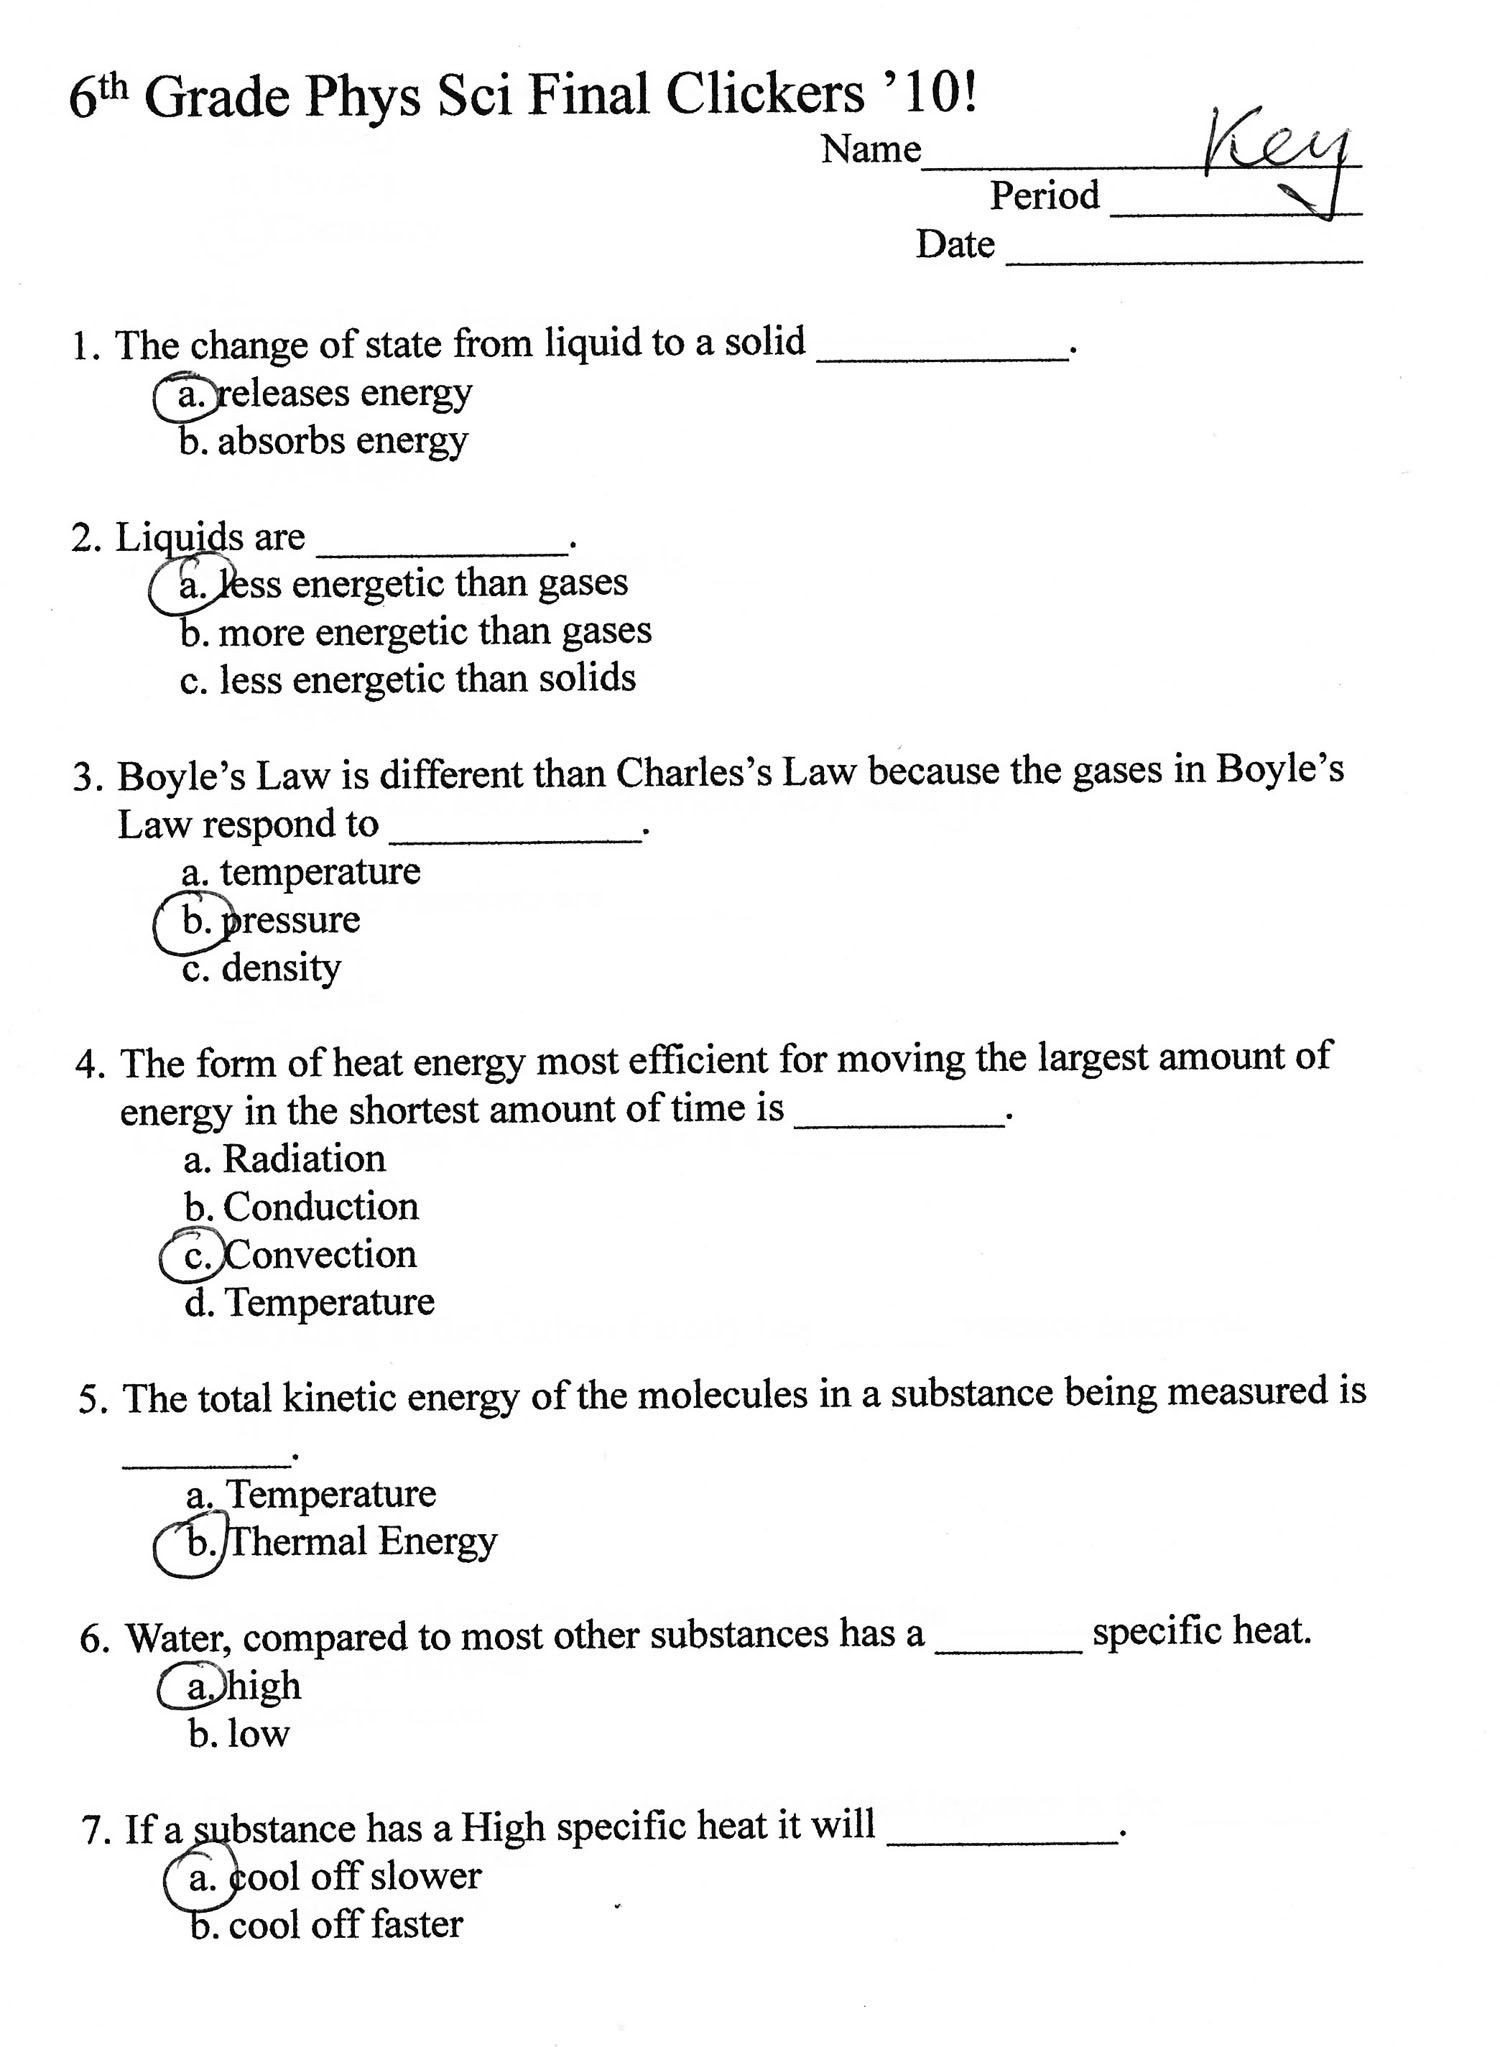 Planet Earth Freshwater Worksheet Answers Water Ecosystems Worksheet